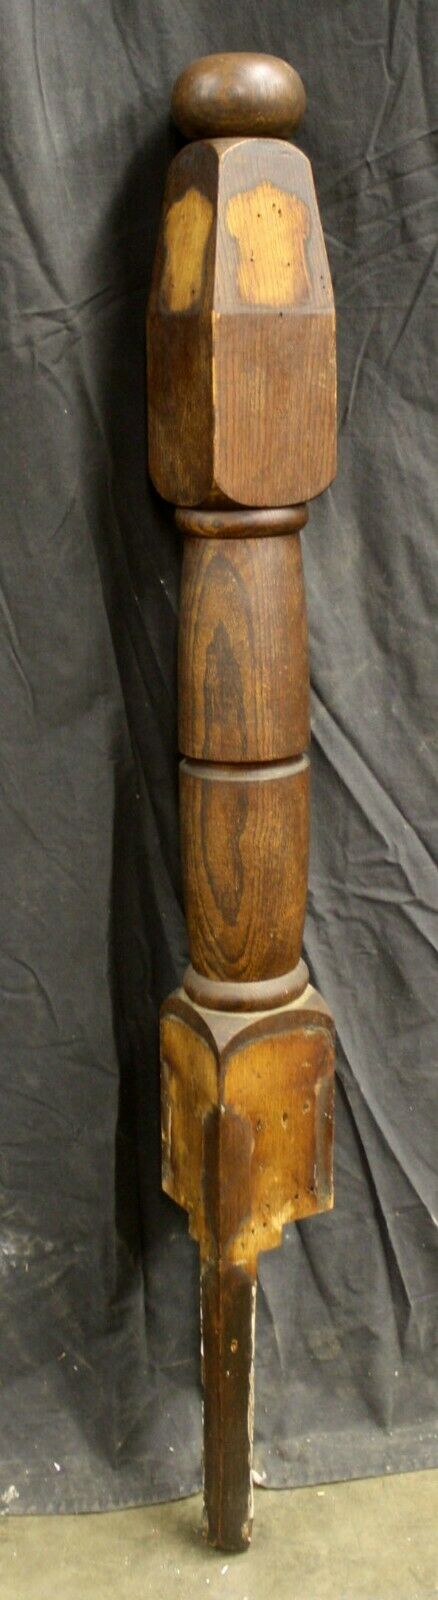 51"H Antique Vintage Old Reclaimed Salvaged Victorian Oak Wood Wooden Staircase Stair Newel Post Column Baluster